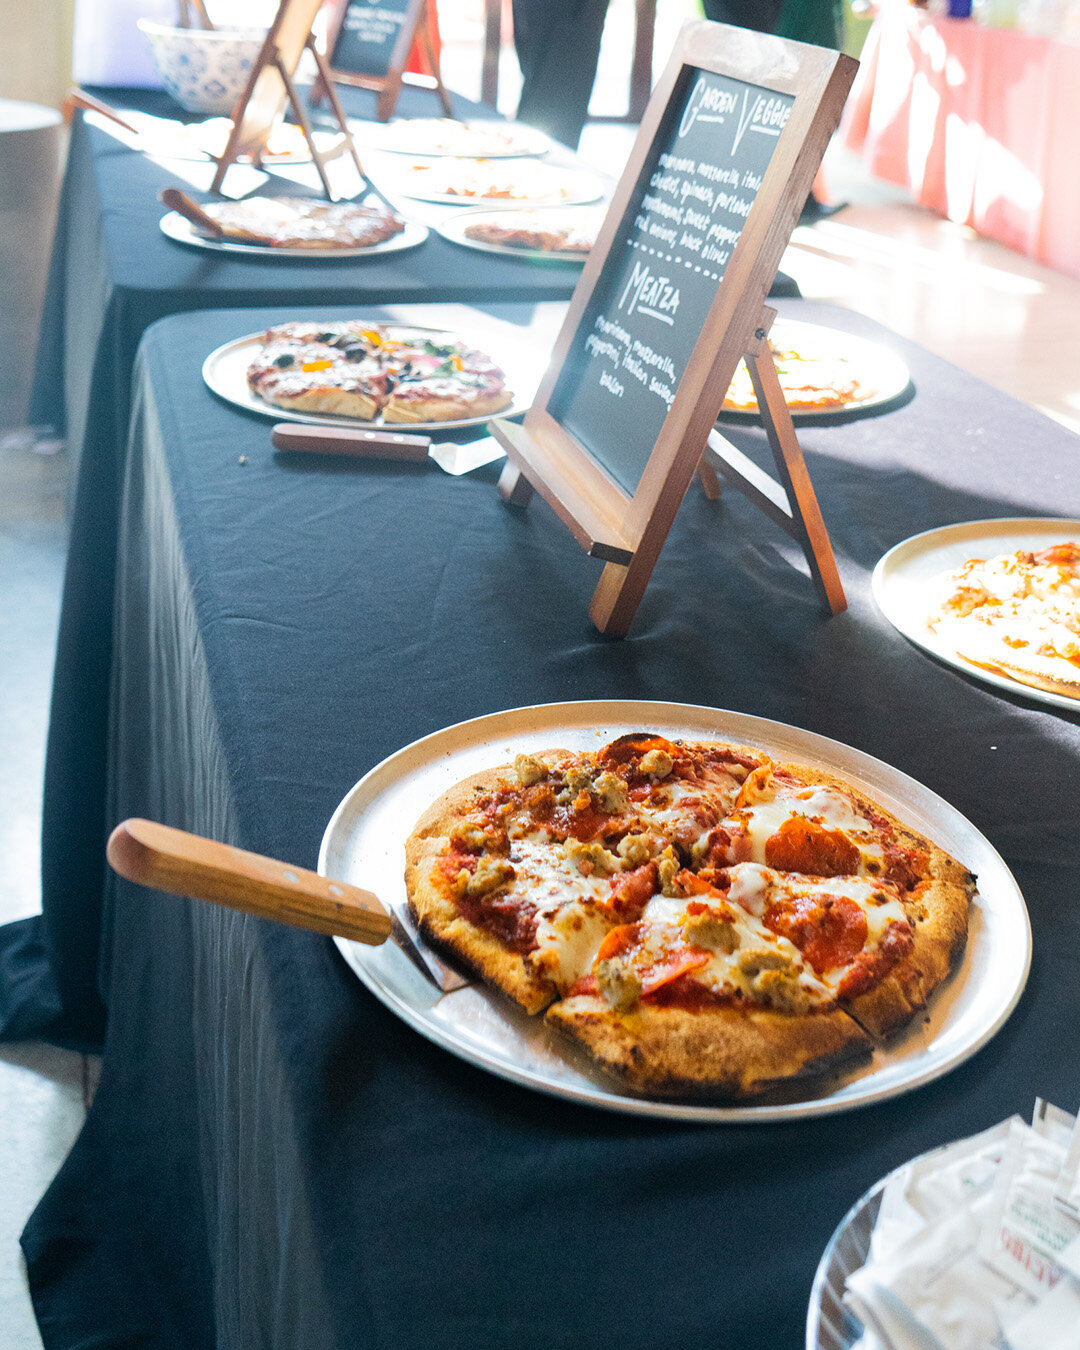 Getting married within the NWA area and want some out of the ordinary catering? Look no further than having our mobile wow your guests with slice after slice of our wood-fired sourdough pizza!

Visit wickedwoodfiredpizza.com for more info
*Currently 